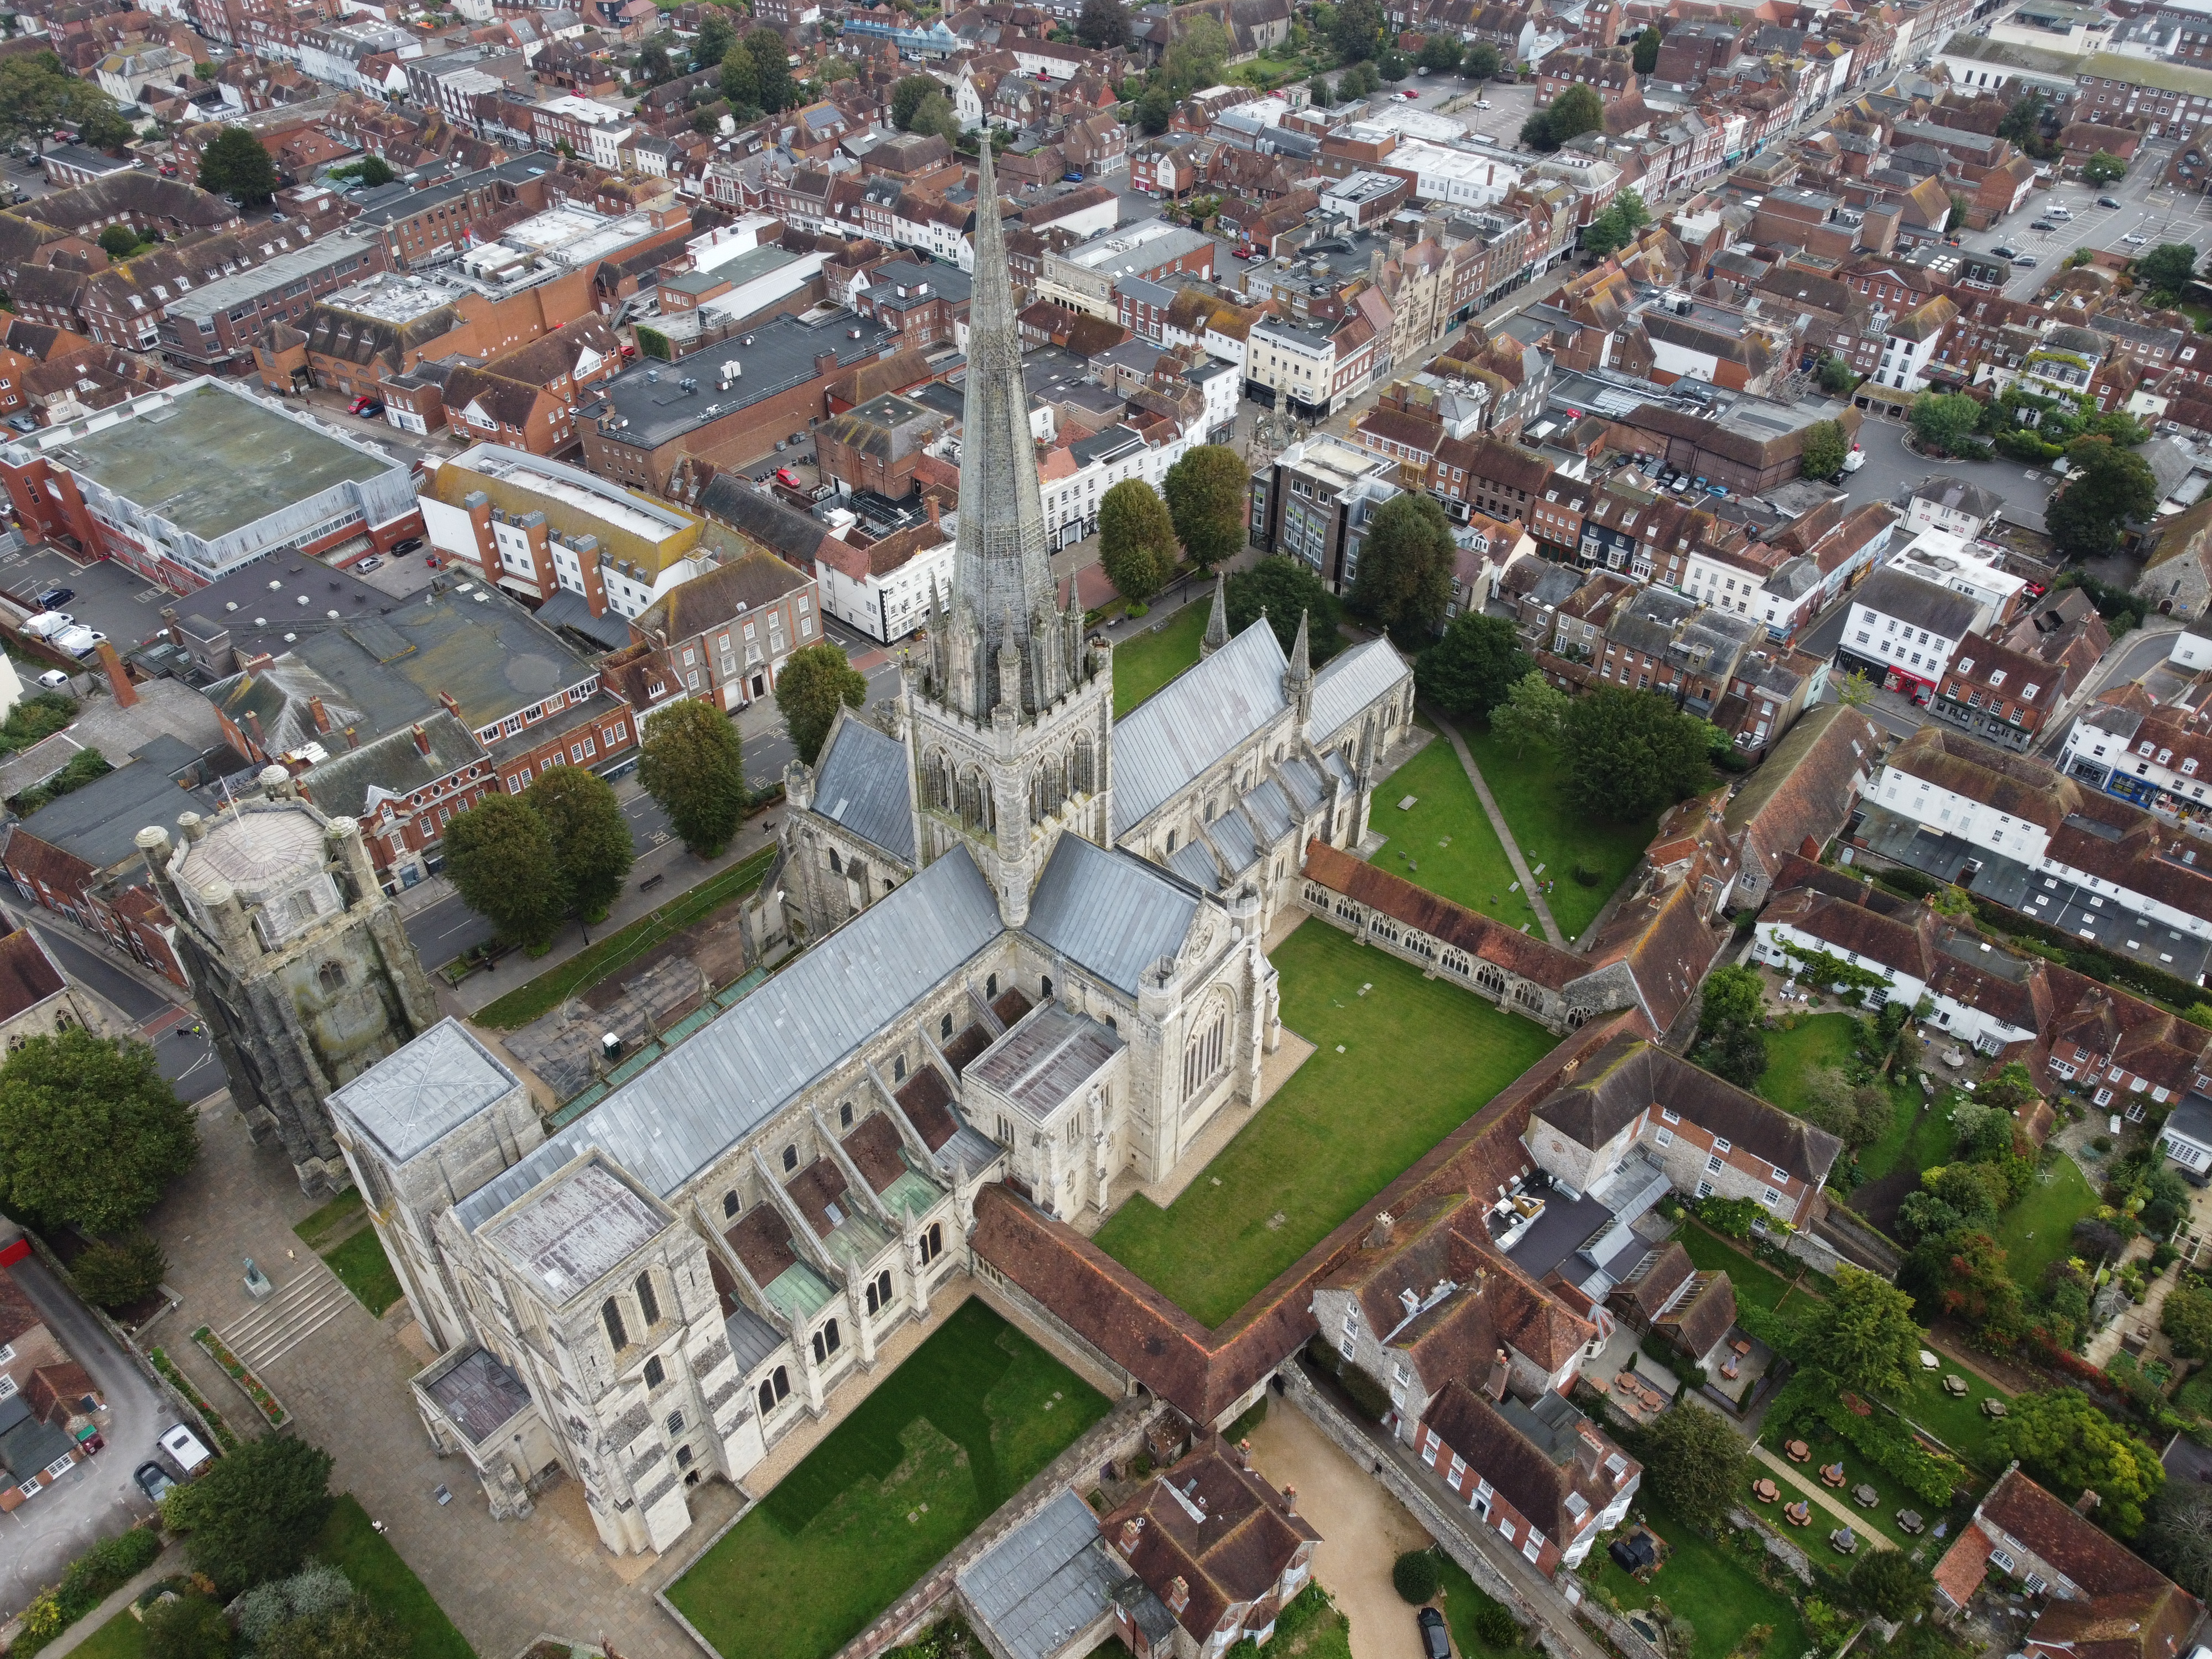 A view of the Chichester Cathedral, covered in grey lead. The historic stone spire sits against a background of buildings - businesses and homes in Chichester